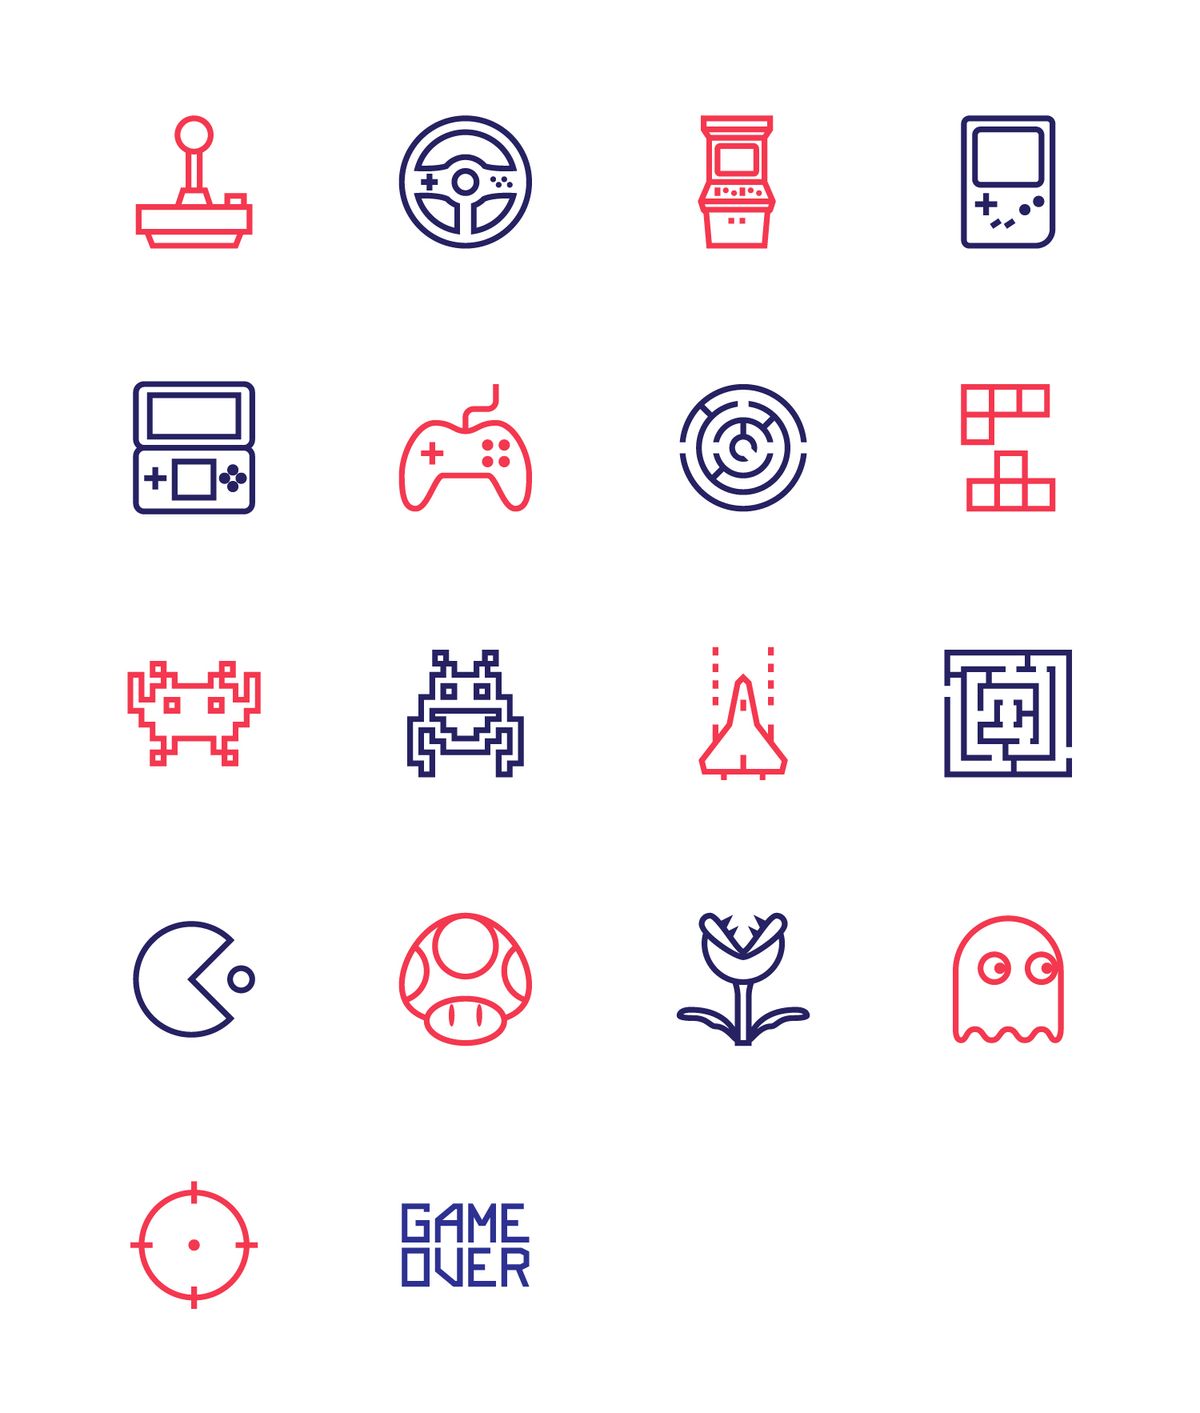 Custom Icons For Game Over Book Illustration 1